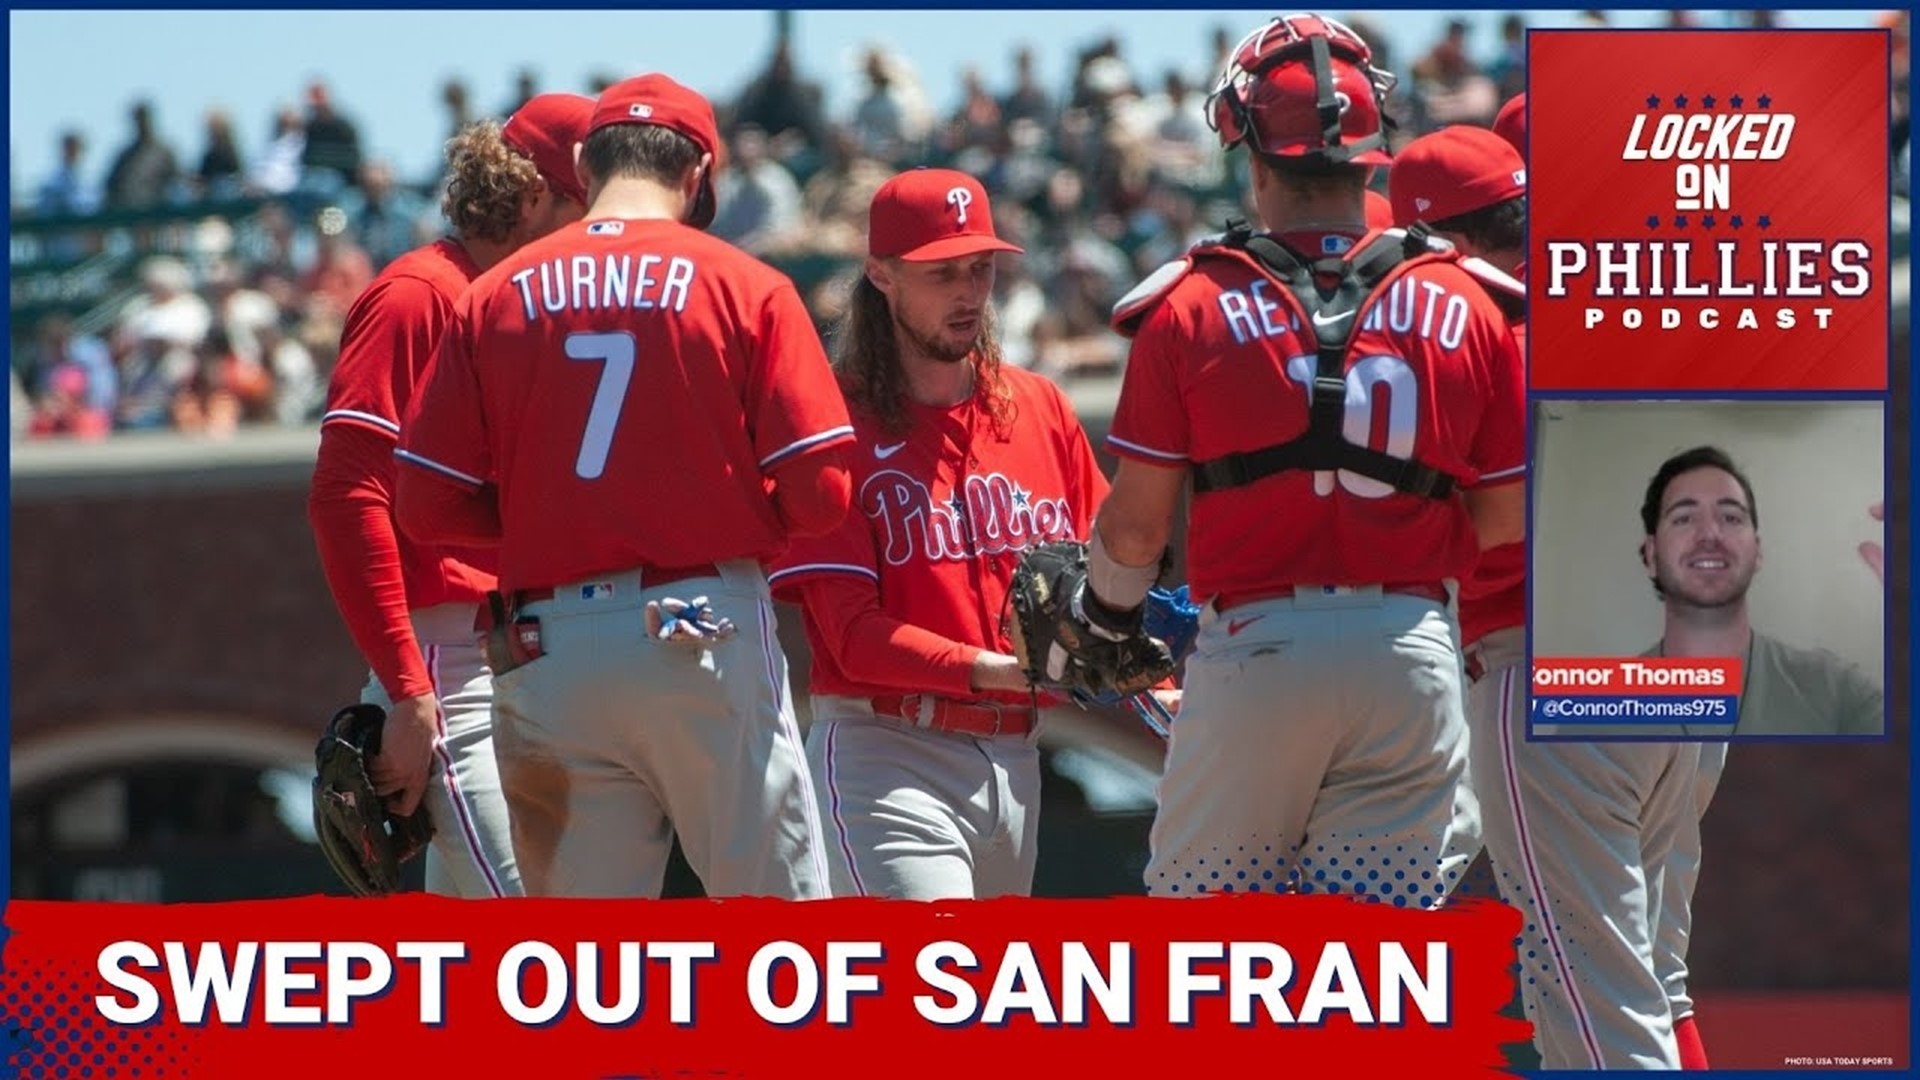 In today's episode, Connor discusses the Philadelphia Phillies' series sweep at the hands of the San Francisco Giants, an 0-4 finish to a West Coast road trip.